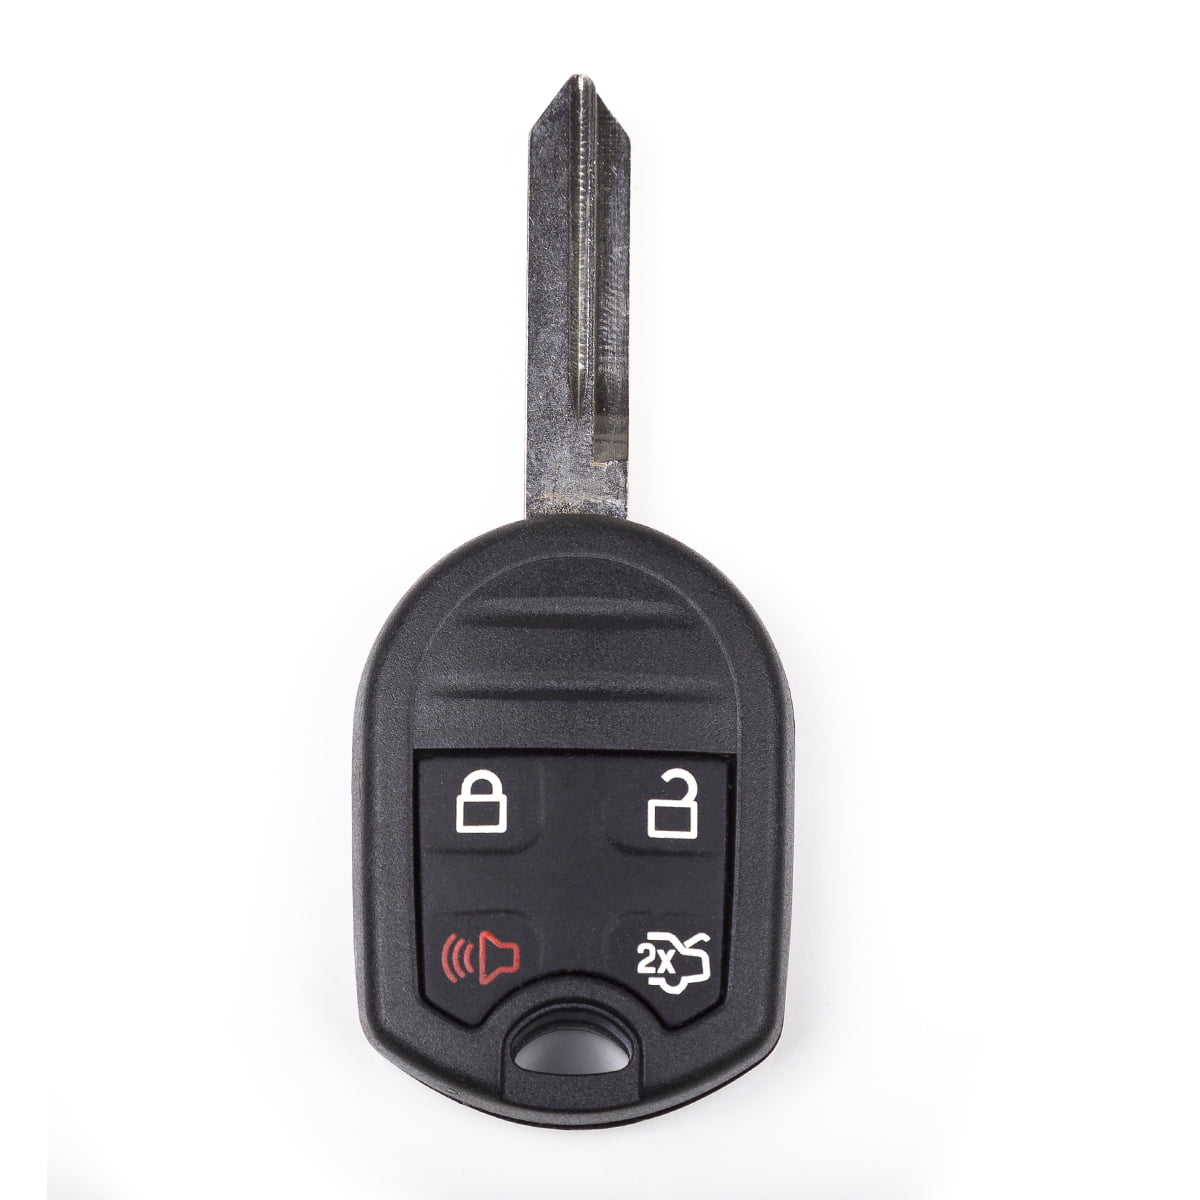 2 Shell Case For 2011 2012 Ford Fusion Keyless Entry Remote Key Fob 